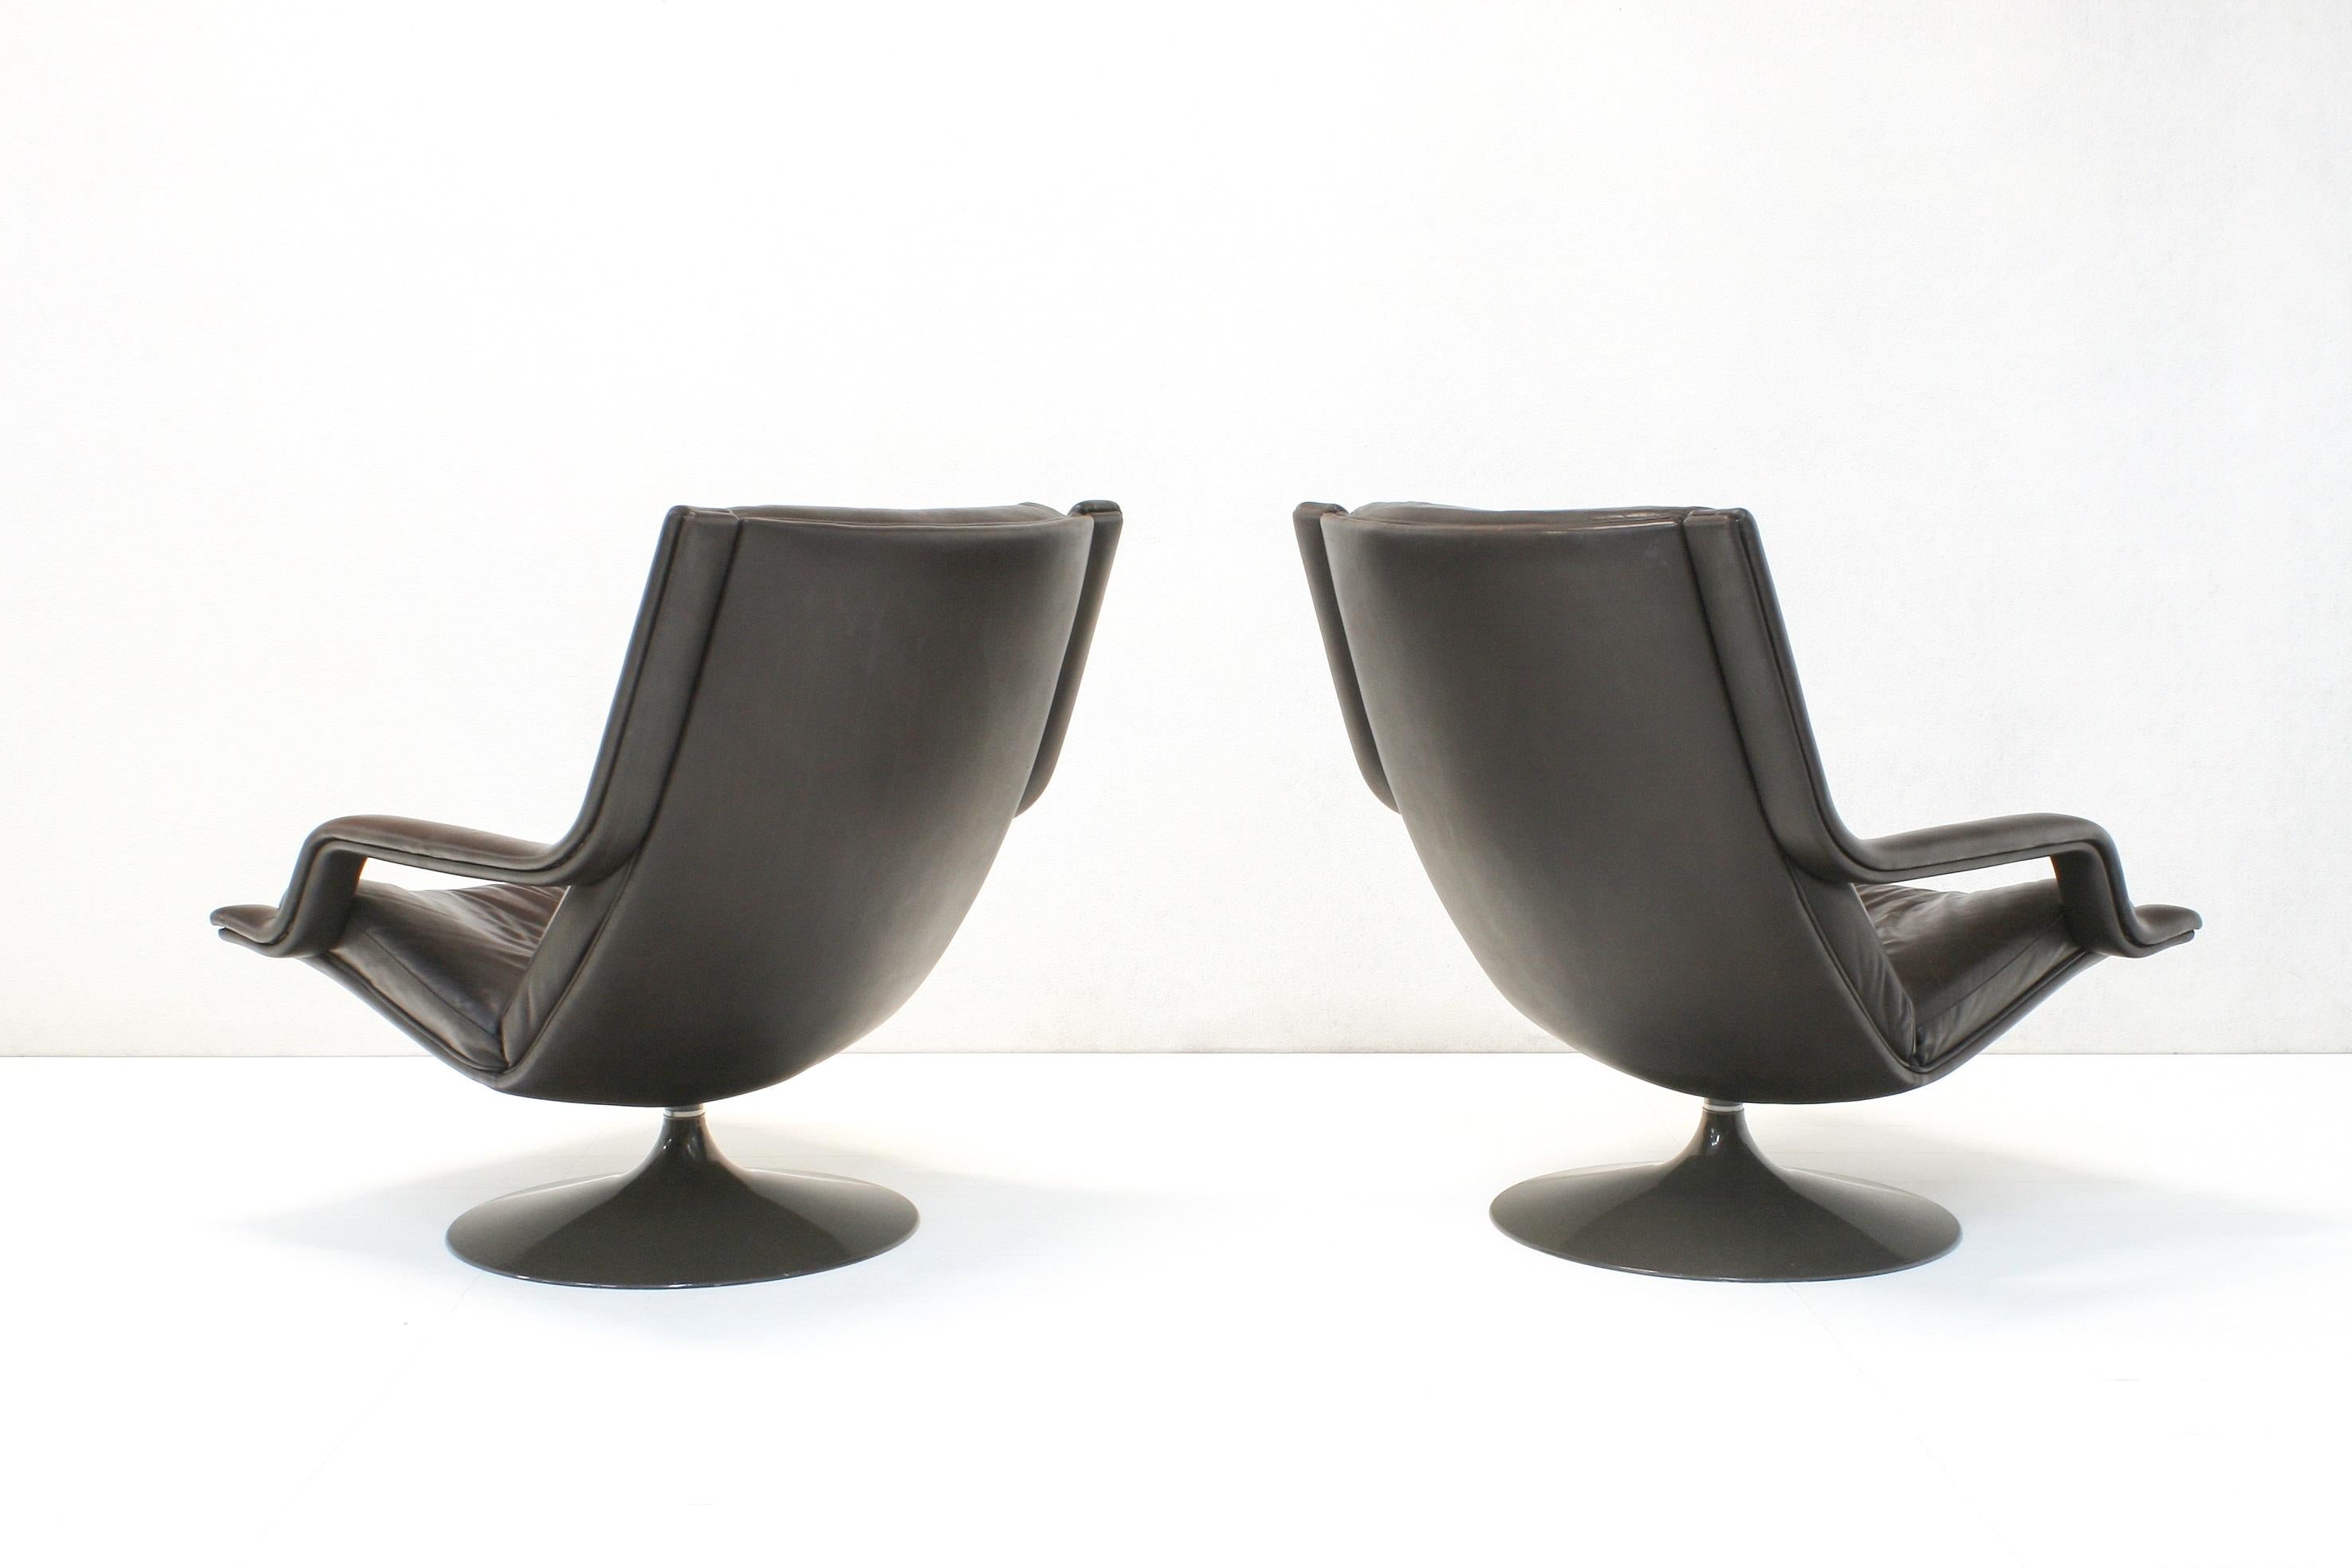 Space Age 2 F152 Leather Swivel Lounge Chairs by Geoffrey D Harcourt for Artifort, 1970s For Sale